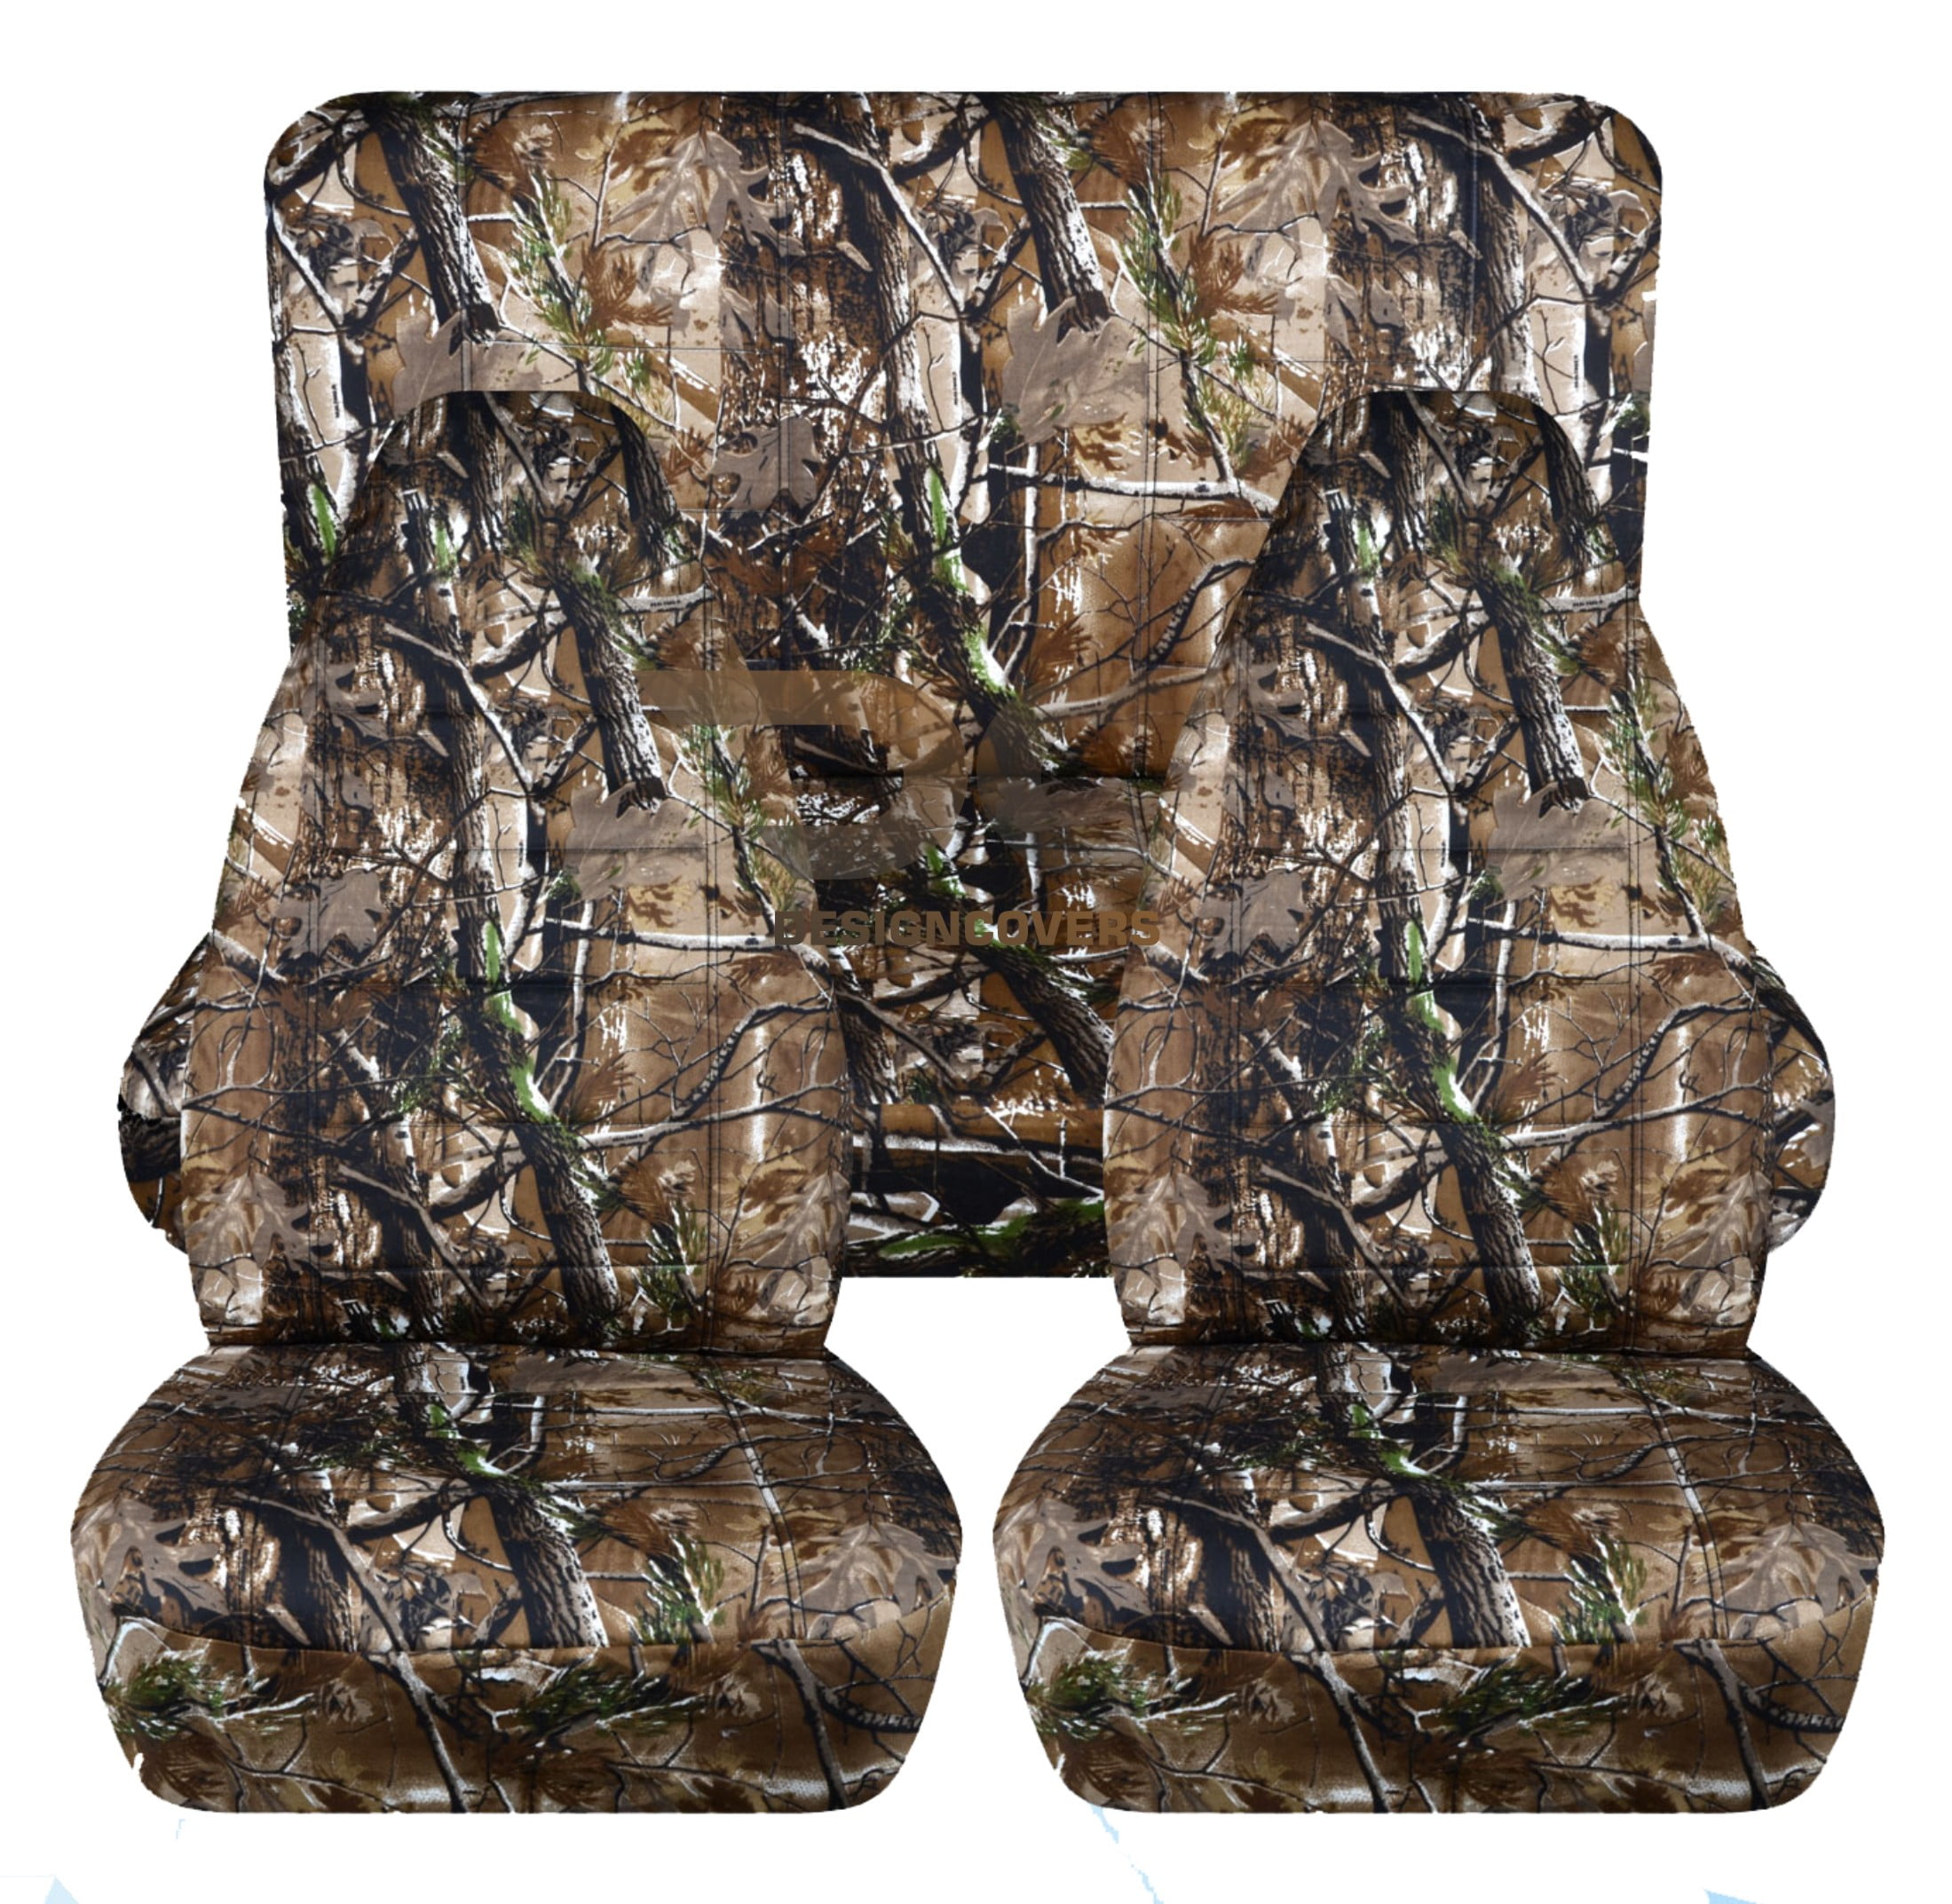 T196-Designcovers Compatible with 1987-1995 Jeep Wrangler YJ Camo 2door Seat  Covers: Woods Camouflage - Full Set Front & Rear 